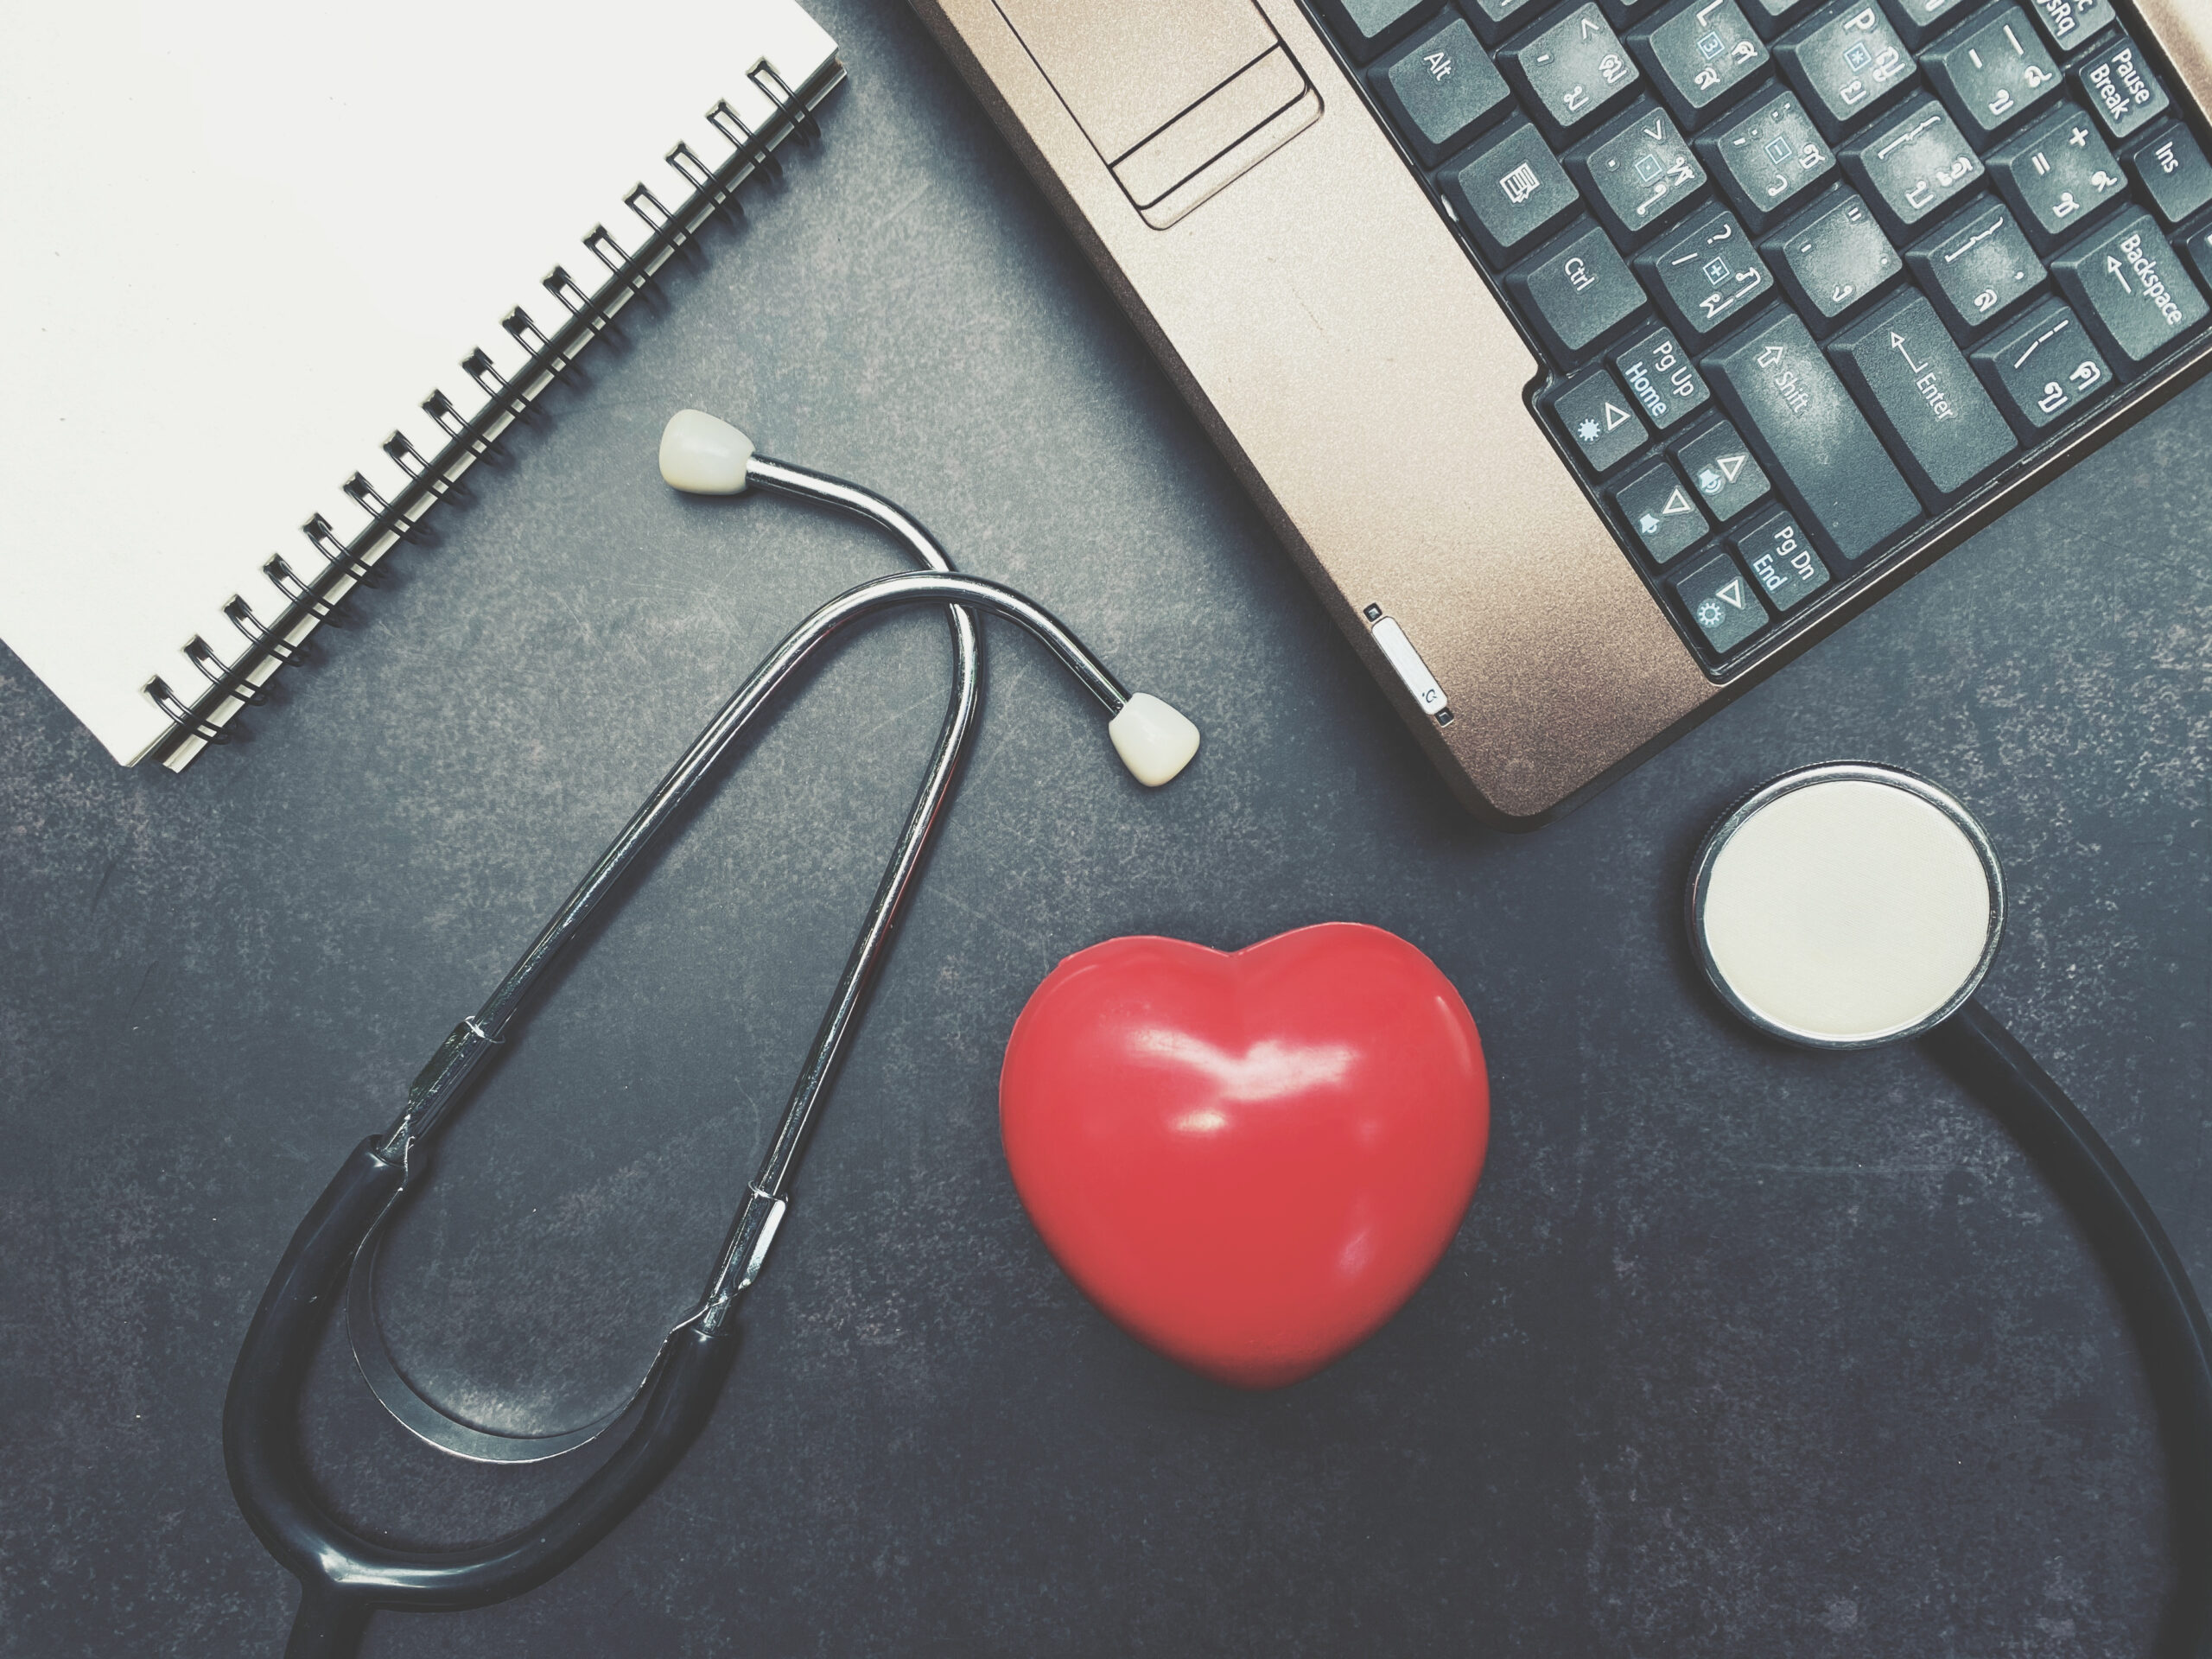 Close,Up,Red,Heart,,Stethoscope,,Notebook,And,Computer,On,Table,